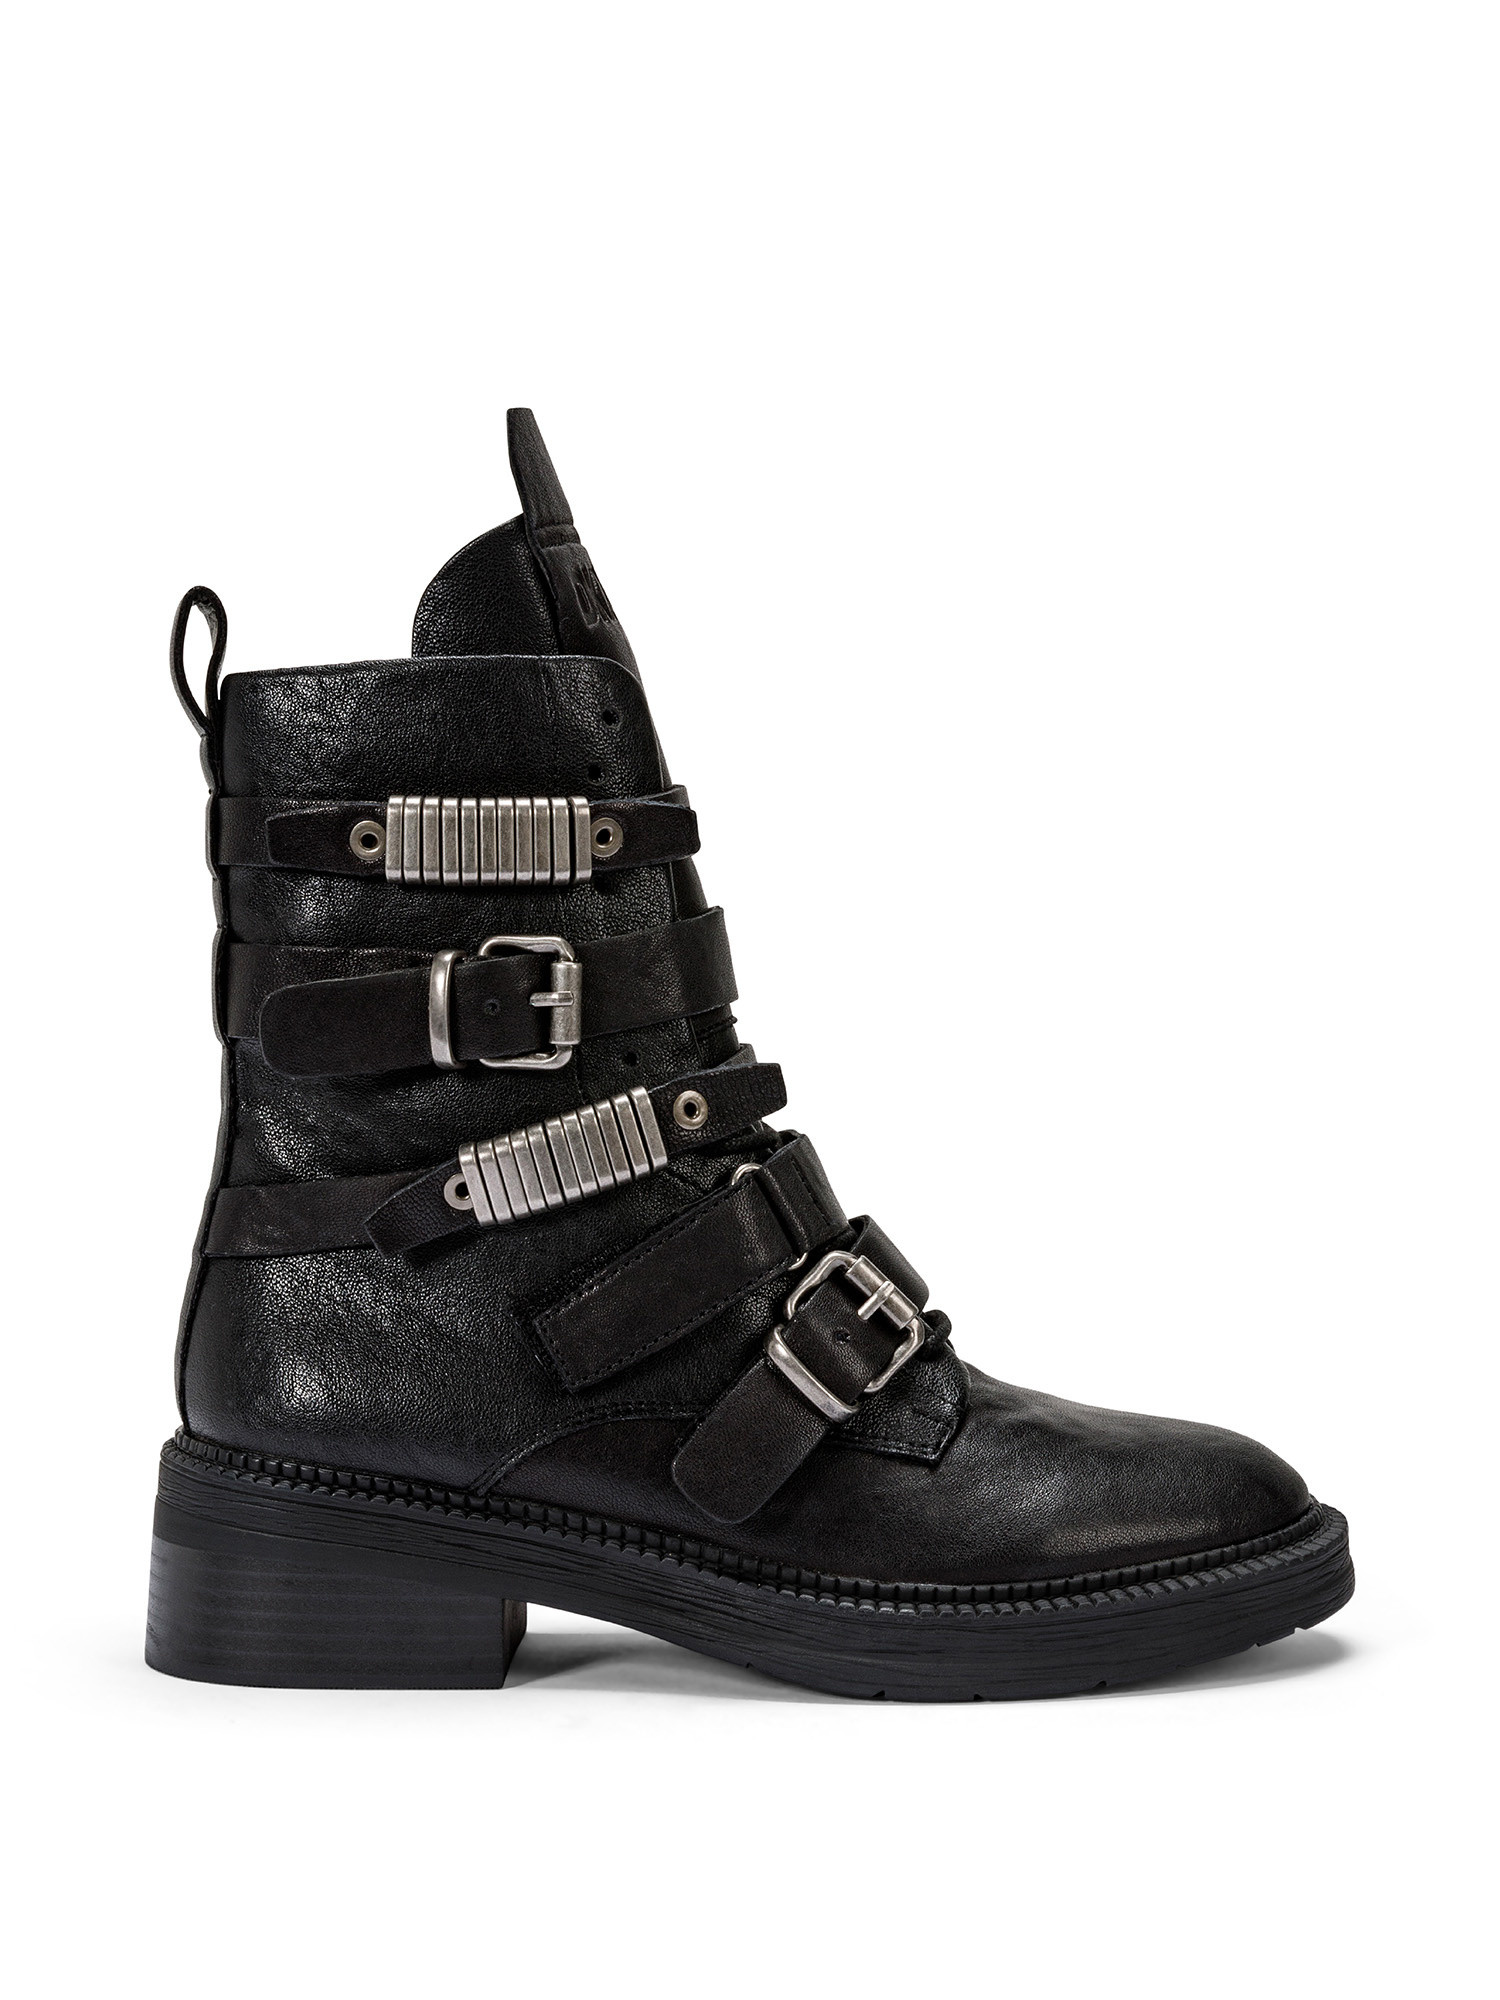 DKNY - Lace up ankle boots, Black, large image number 0